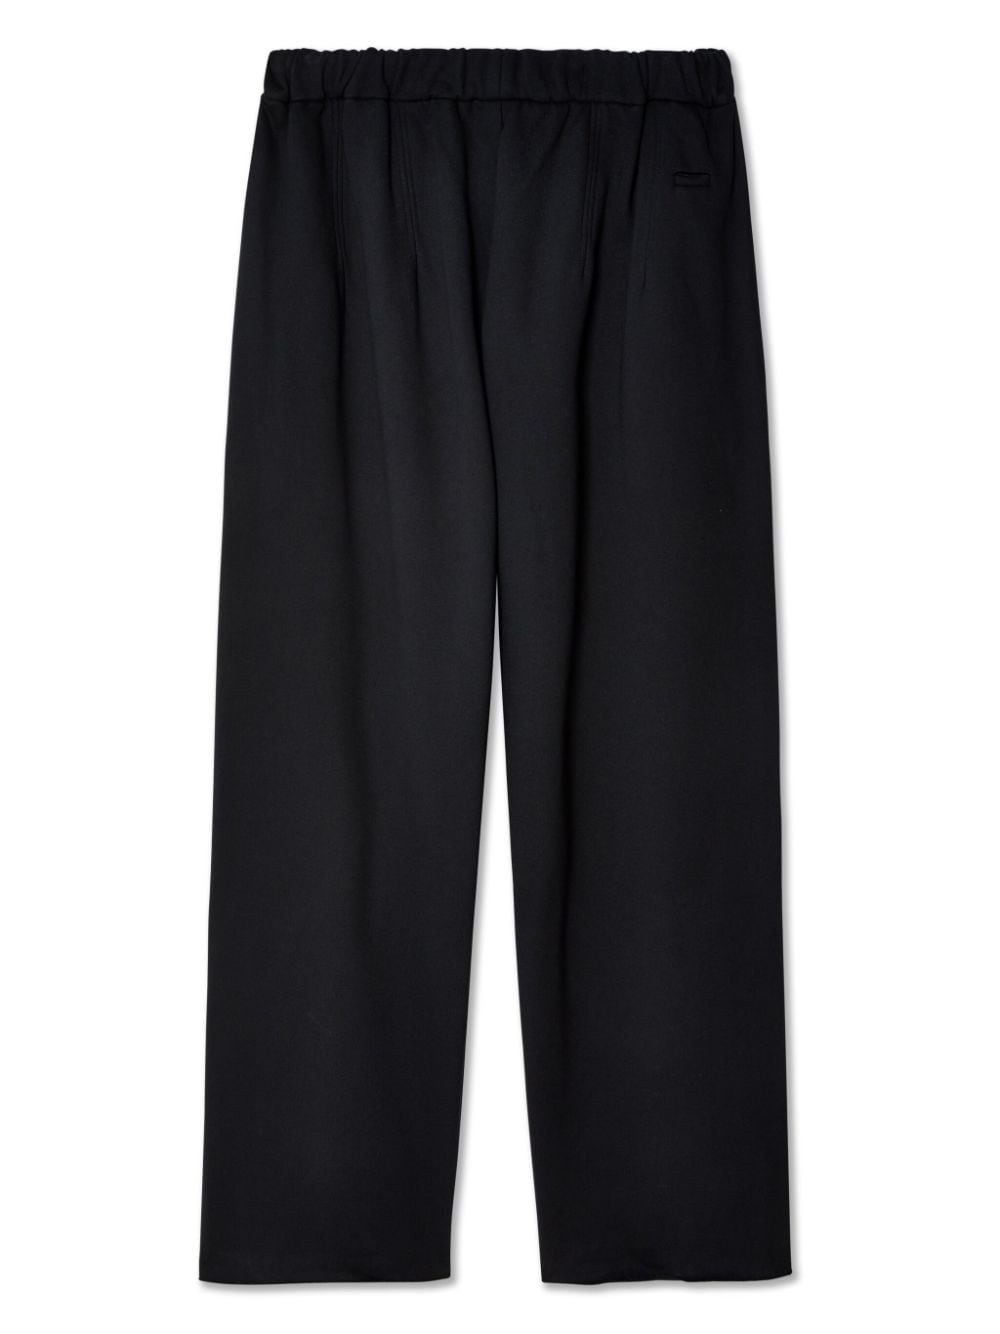 detailed-pocket wide-leg trousers - 2